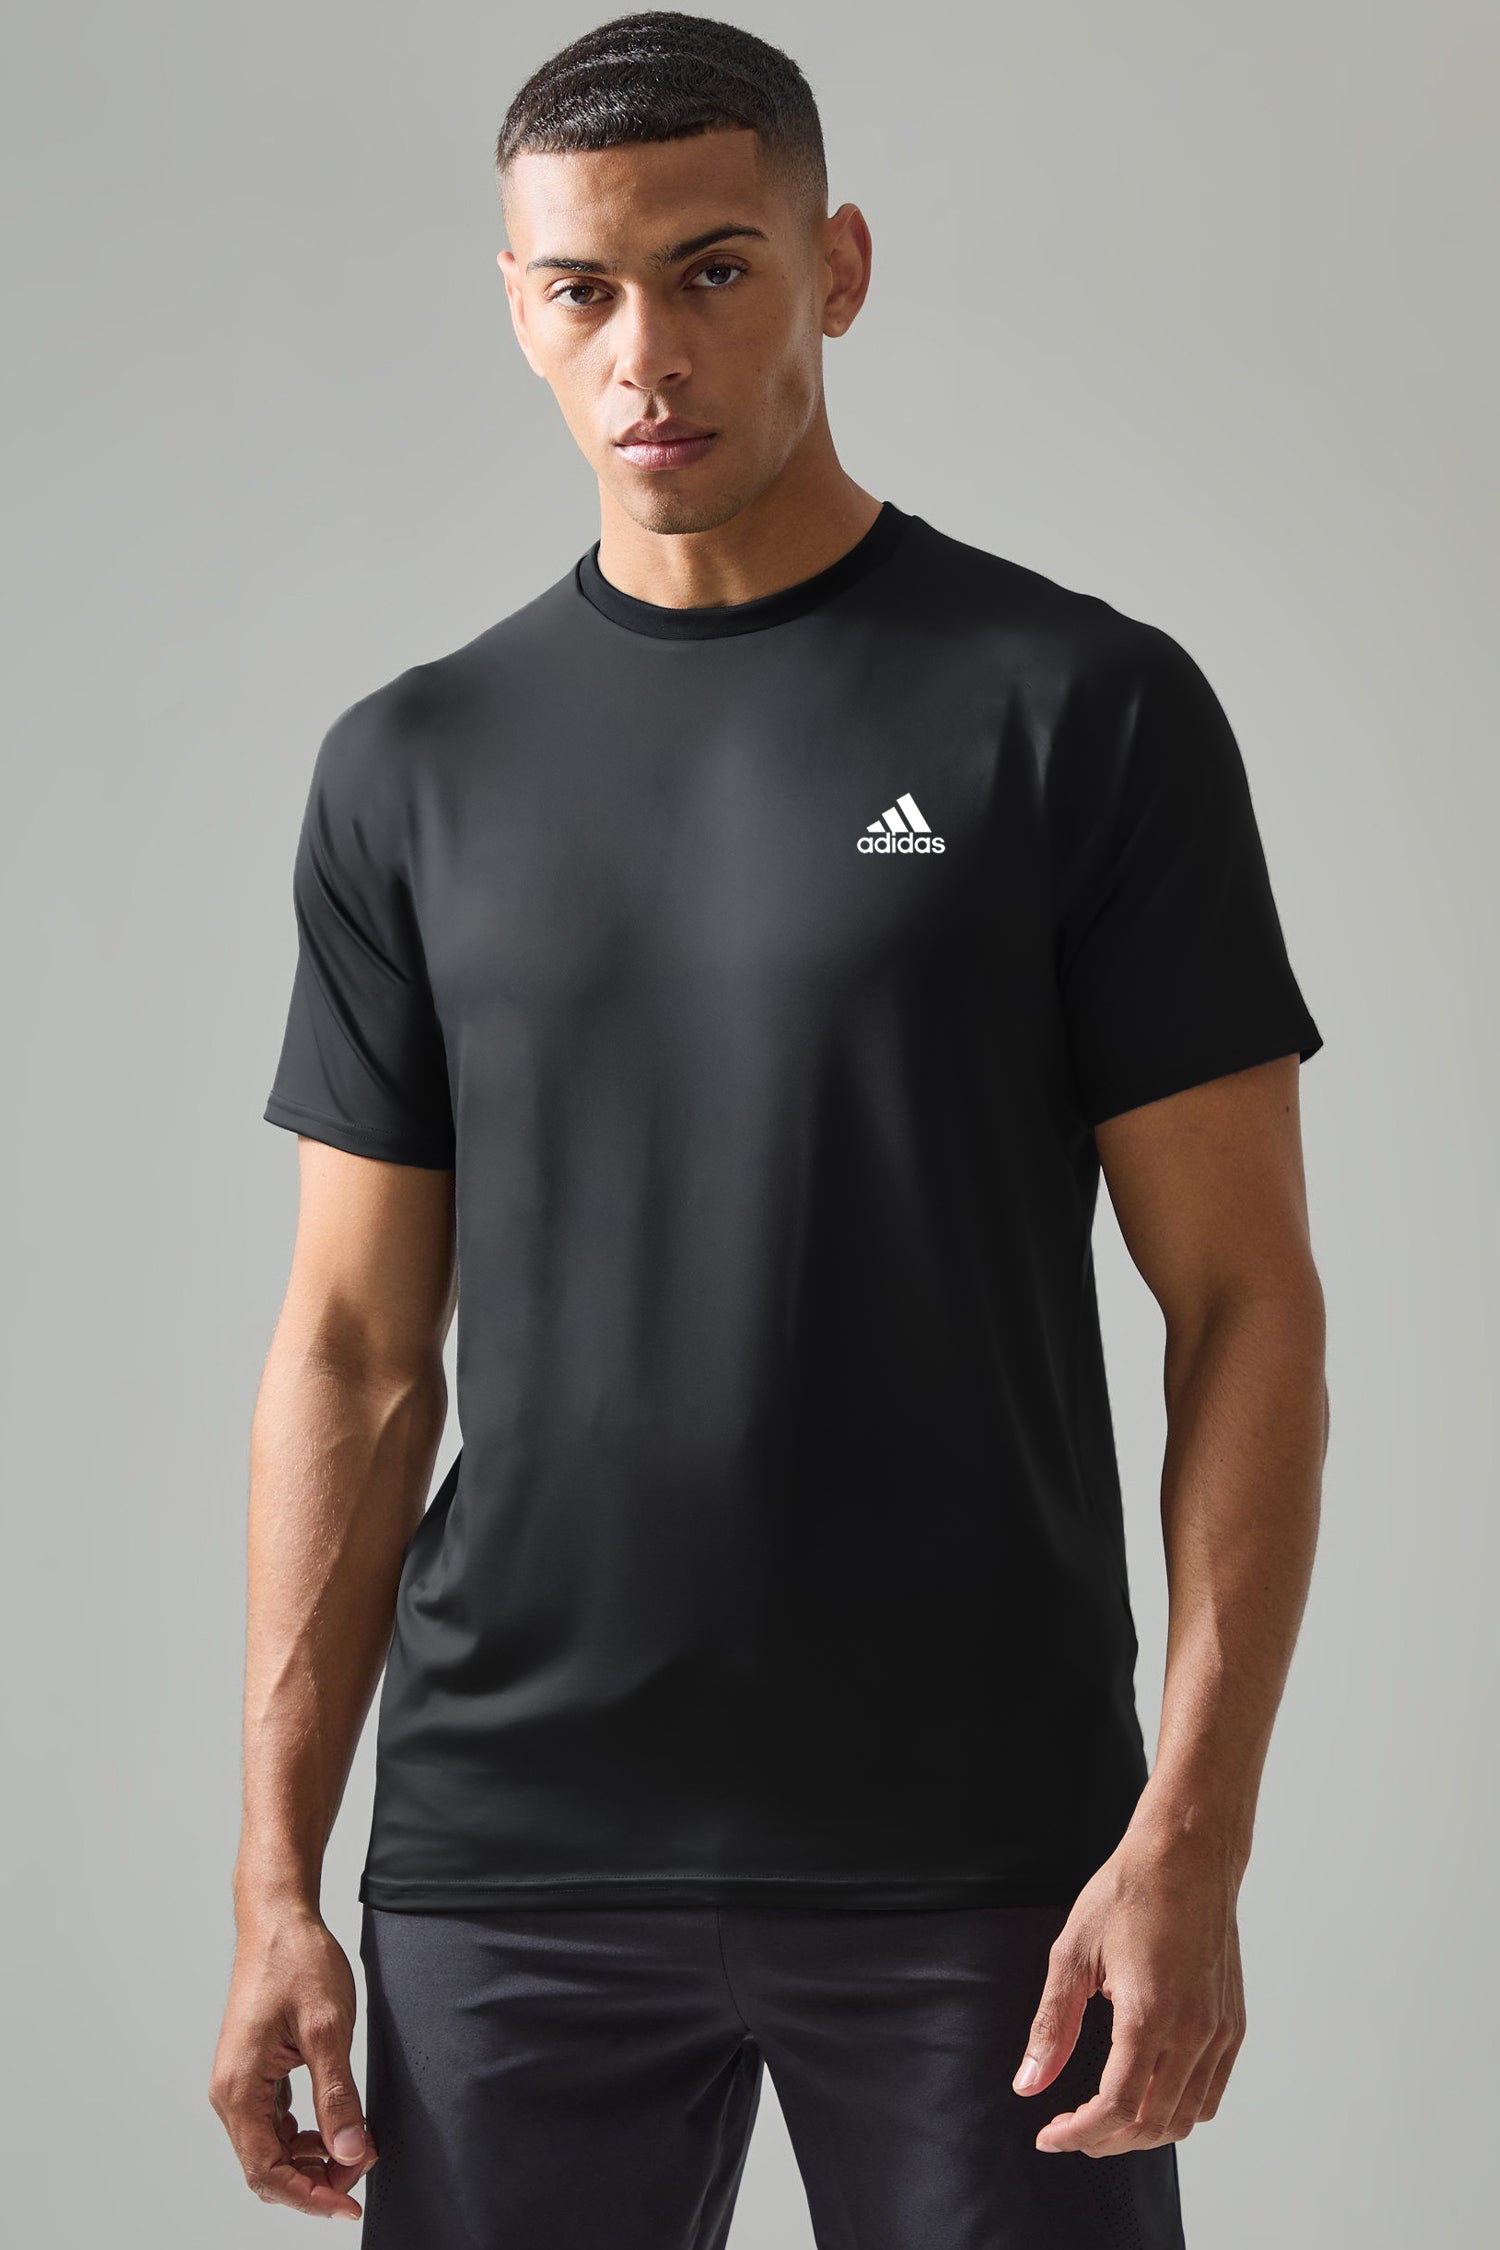 Adds Reflector Logo Branded Dry Fit Tee